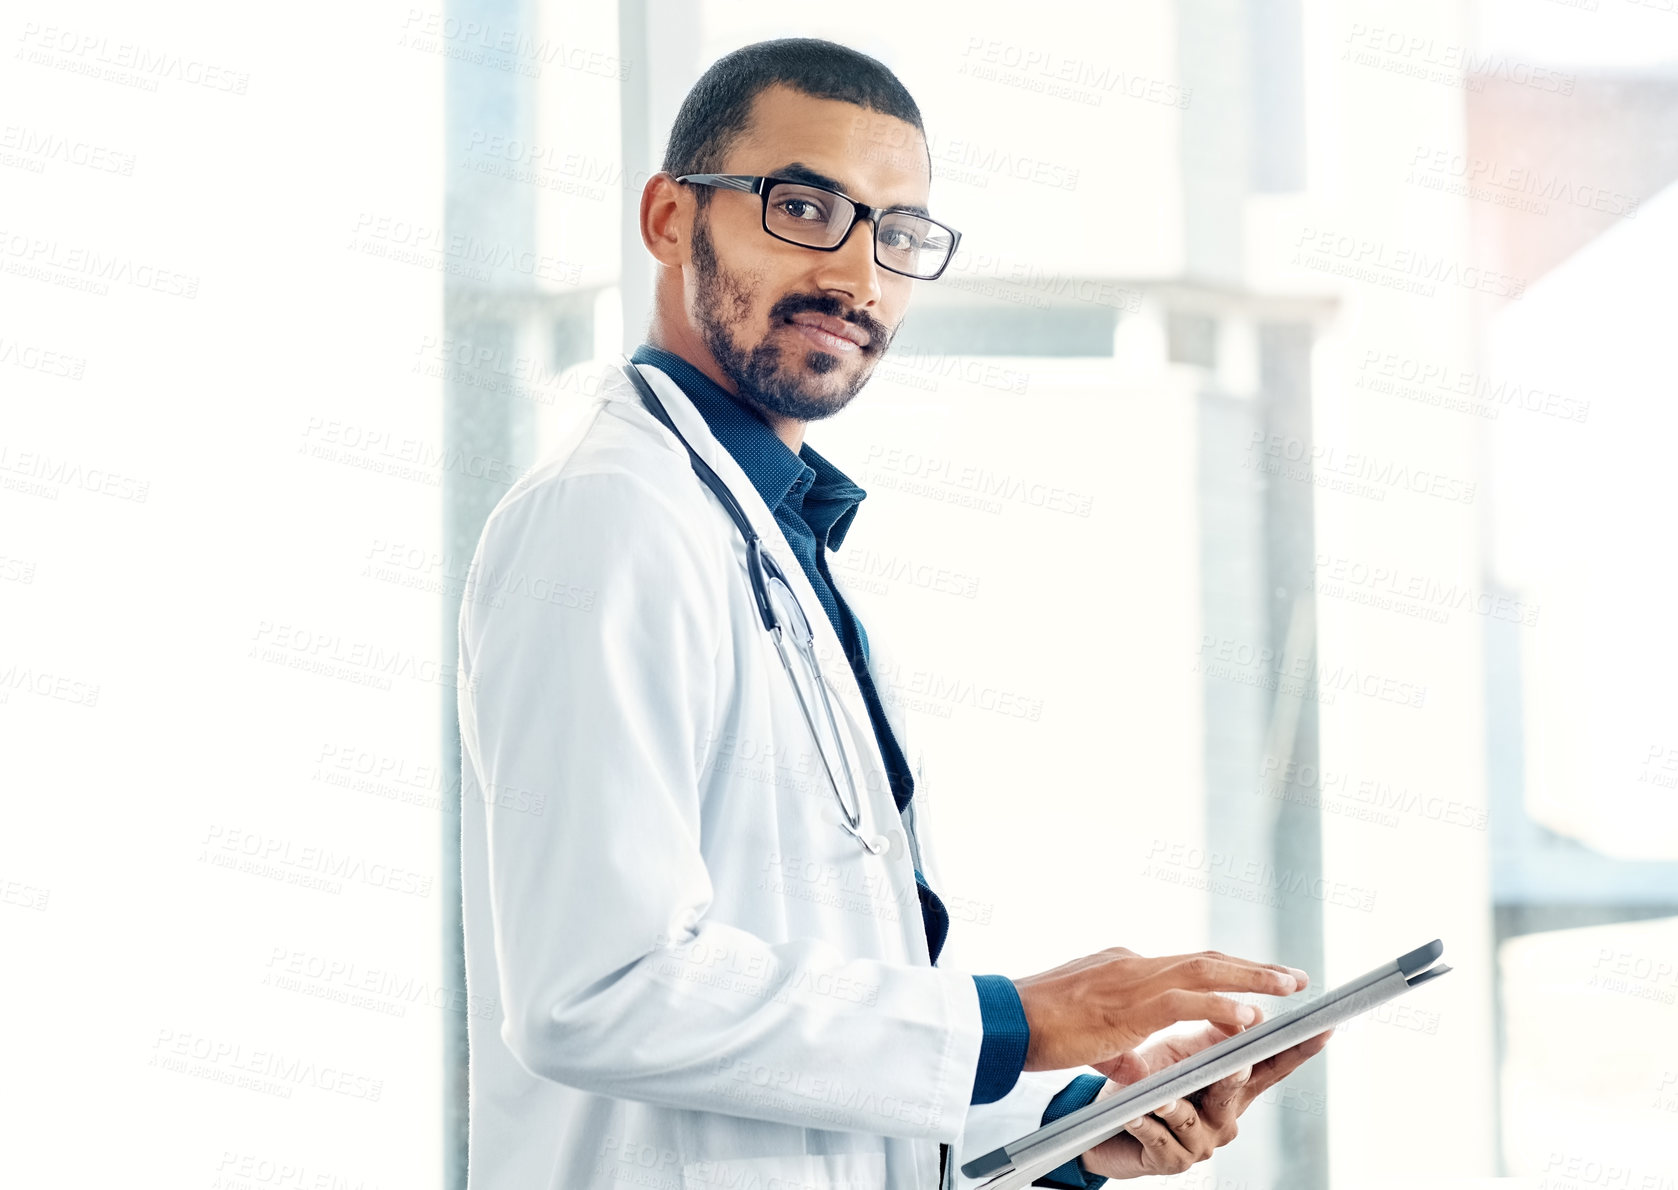 Buy stock photo Portrait of a young doctor using a digital tablet in a modern hospital